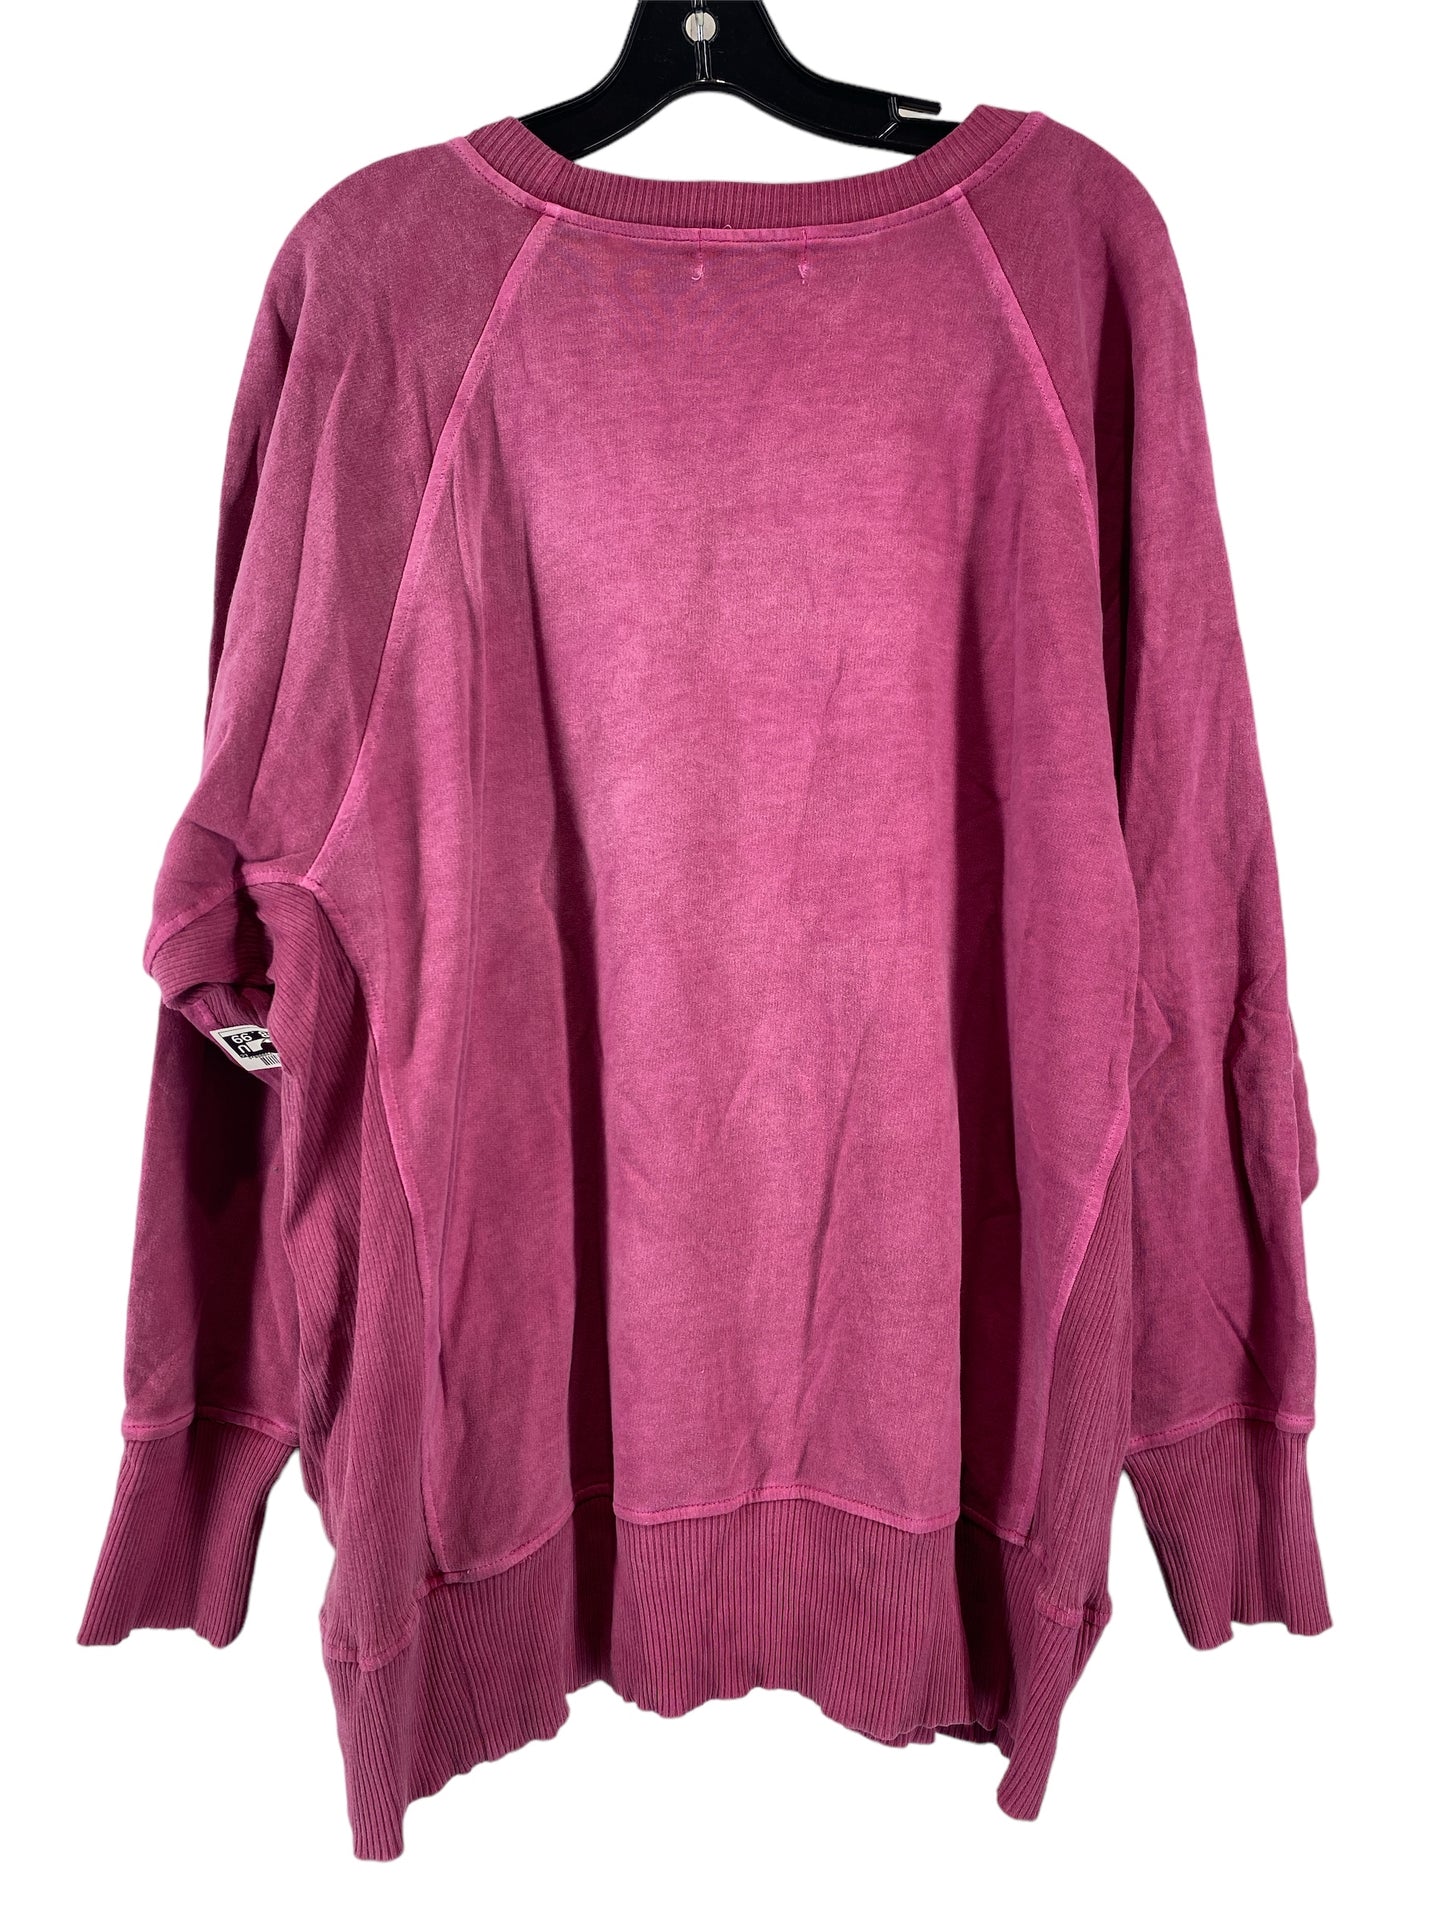 Top Long Sleeve Basic By Zenana Outfitters  Size: 2x